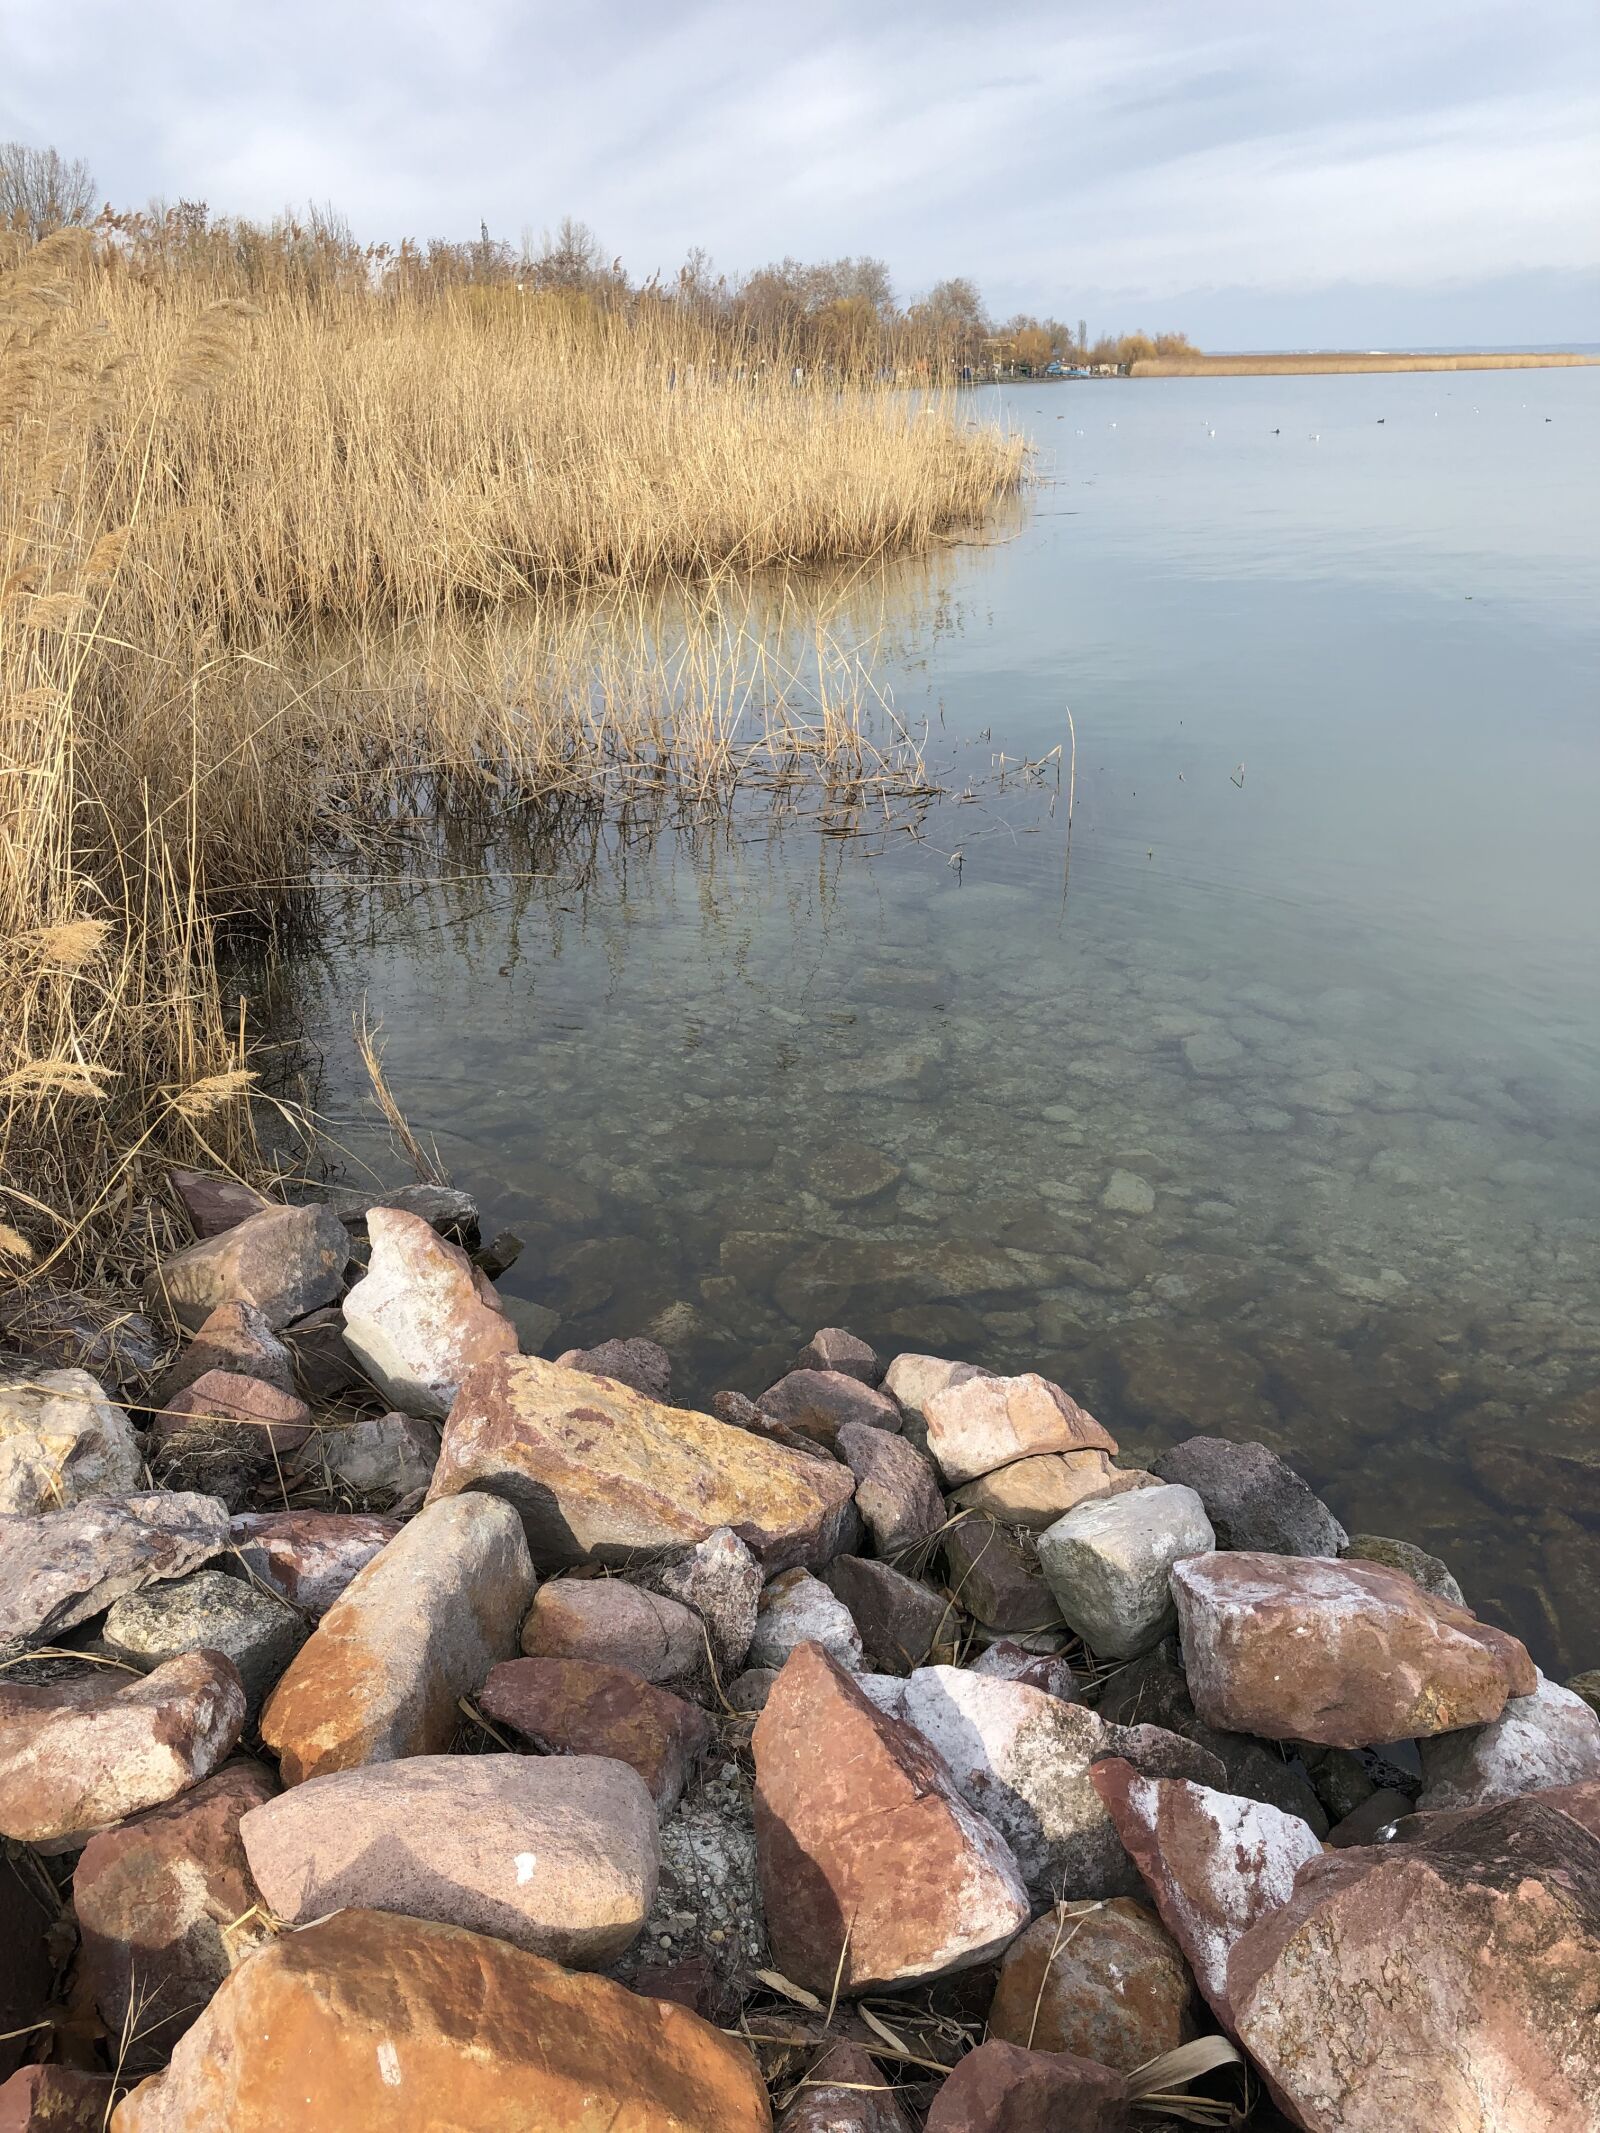 iPhone 8 Plus back dual camera 3.99mm f/1.8 sample photo. Lake, cold, rock photography